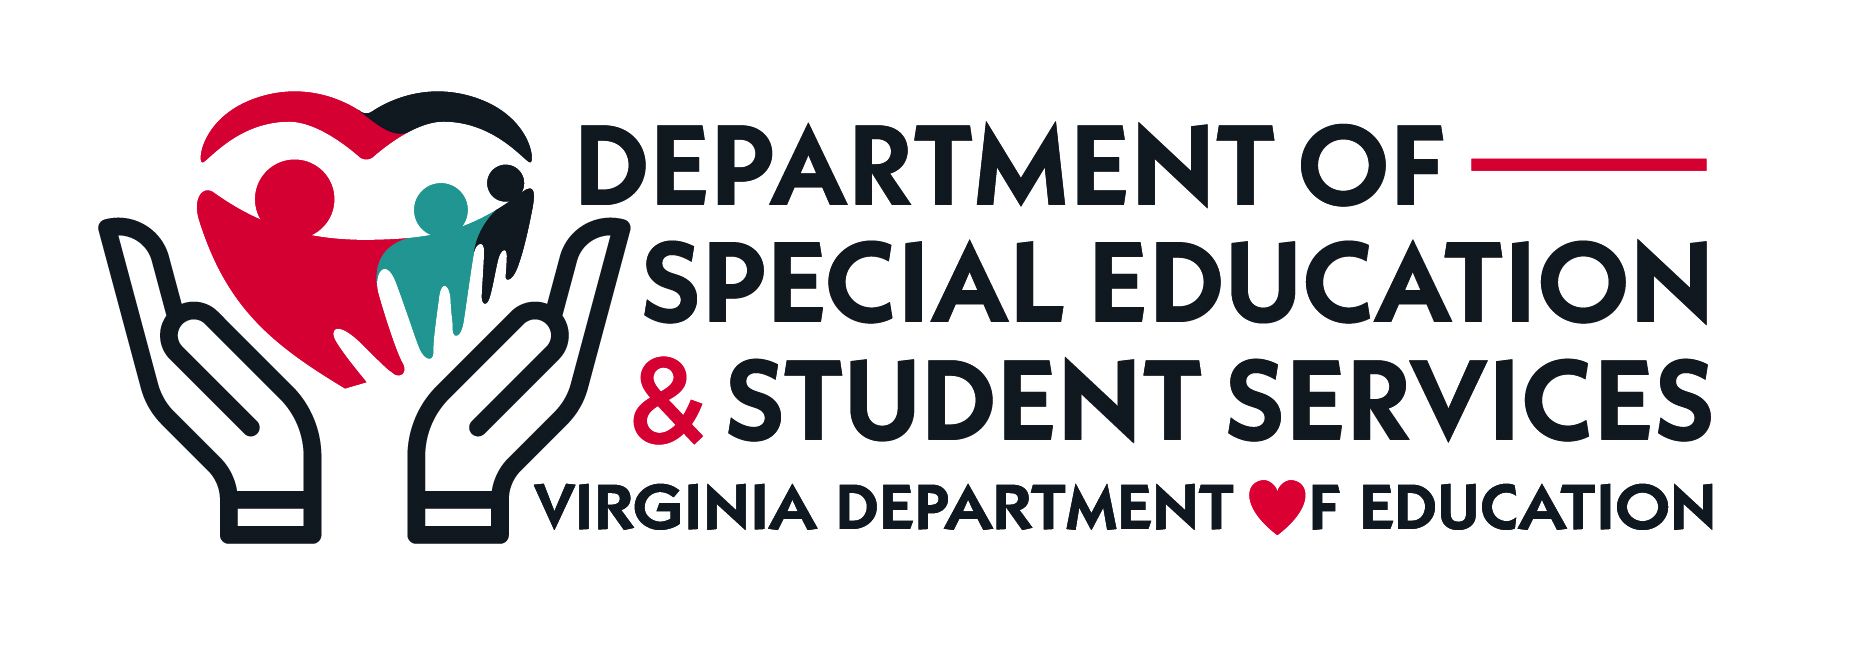 Office of Students Services logo